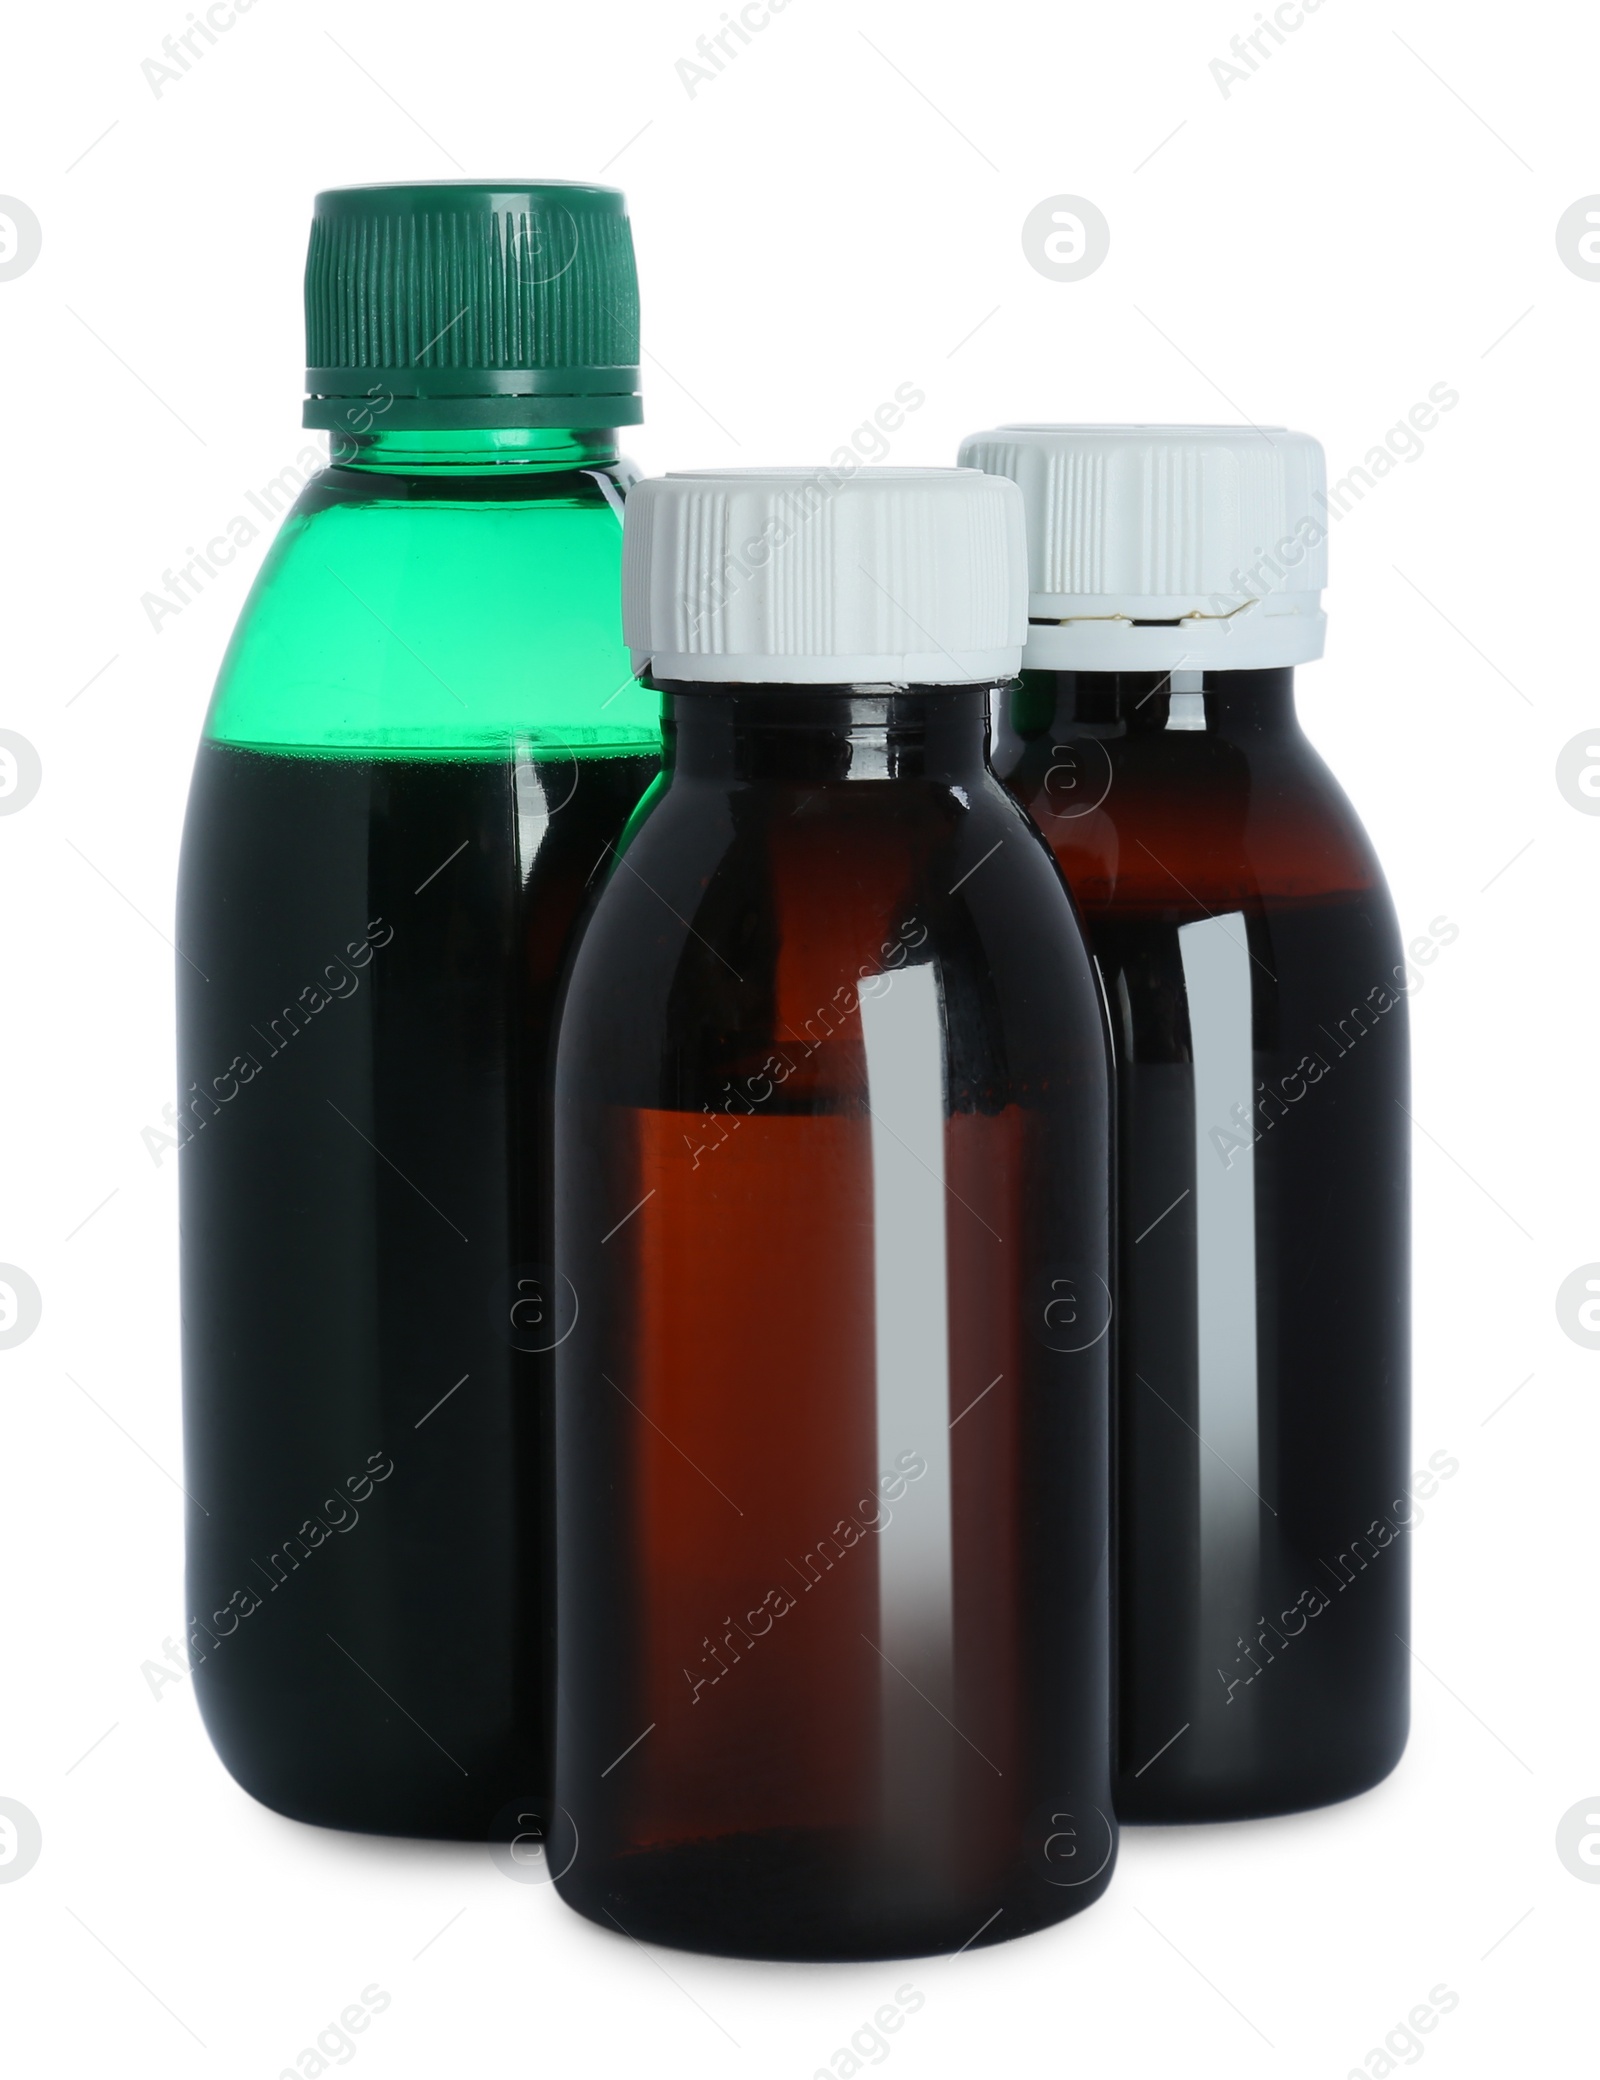 Photo of Bottles of cough syrup on white background